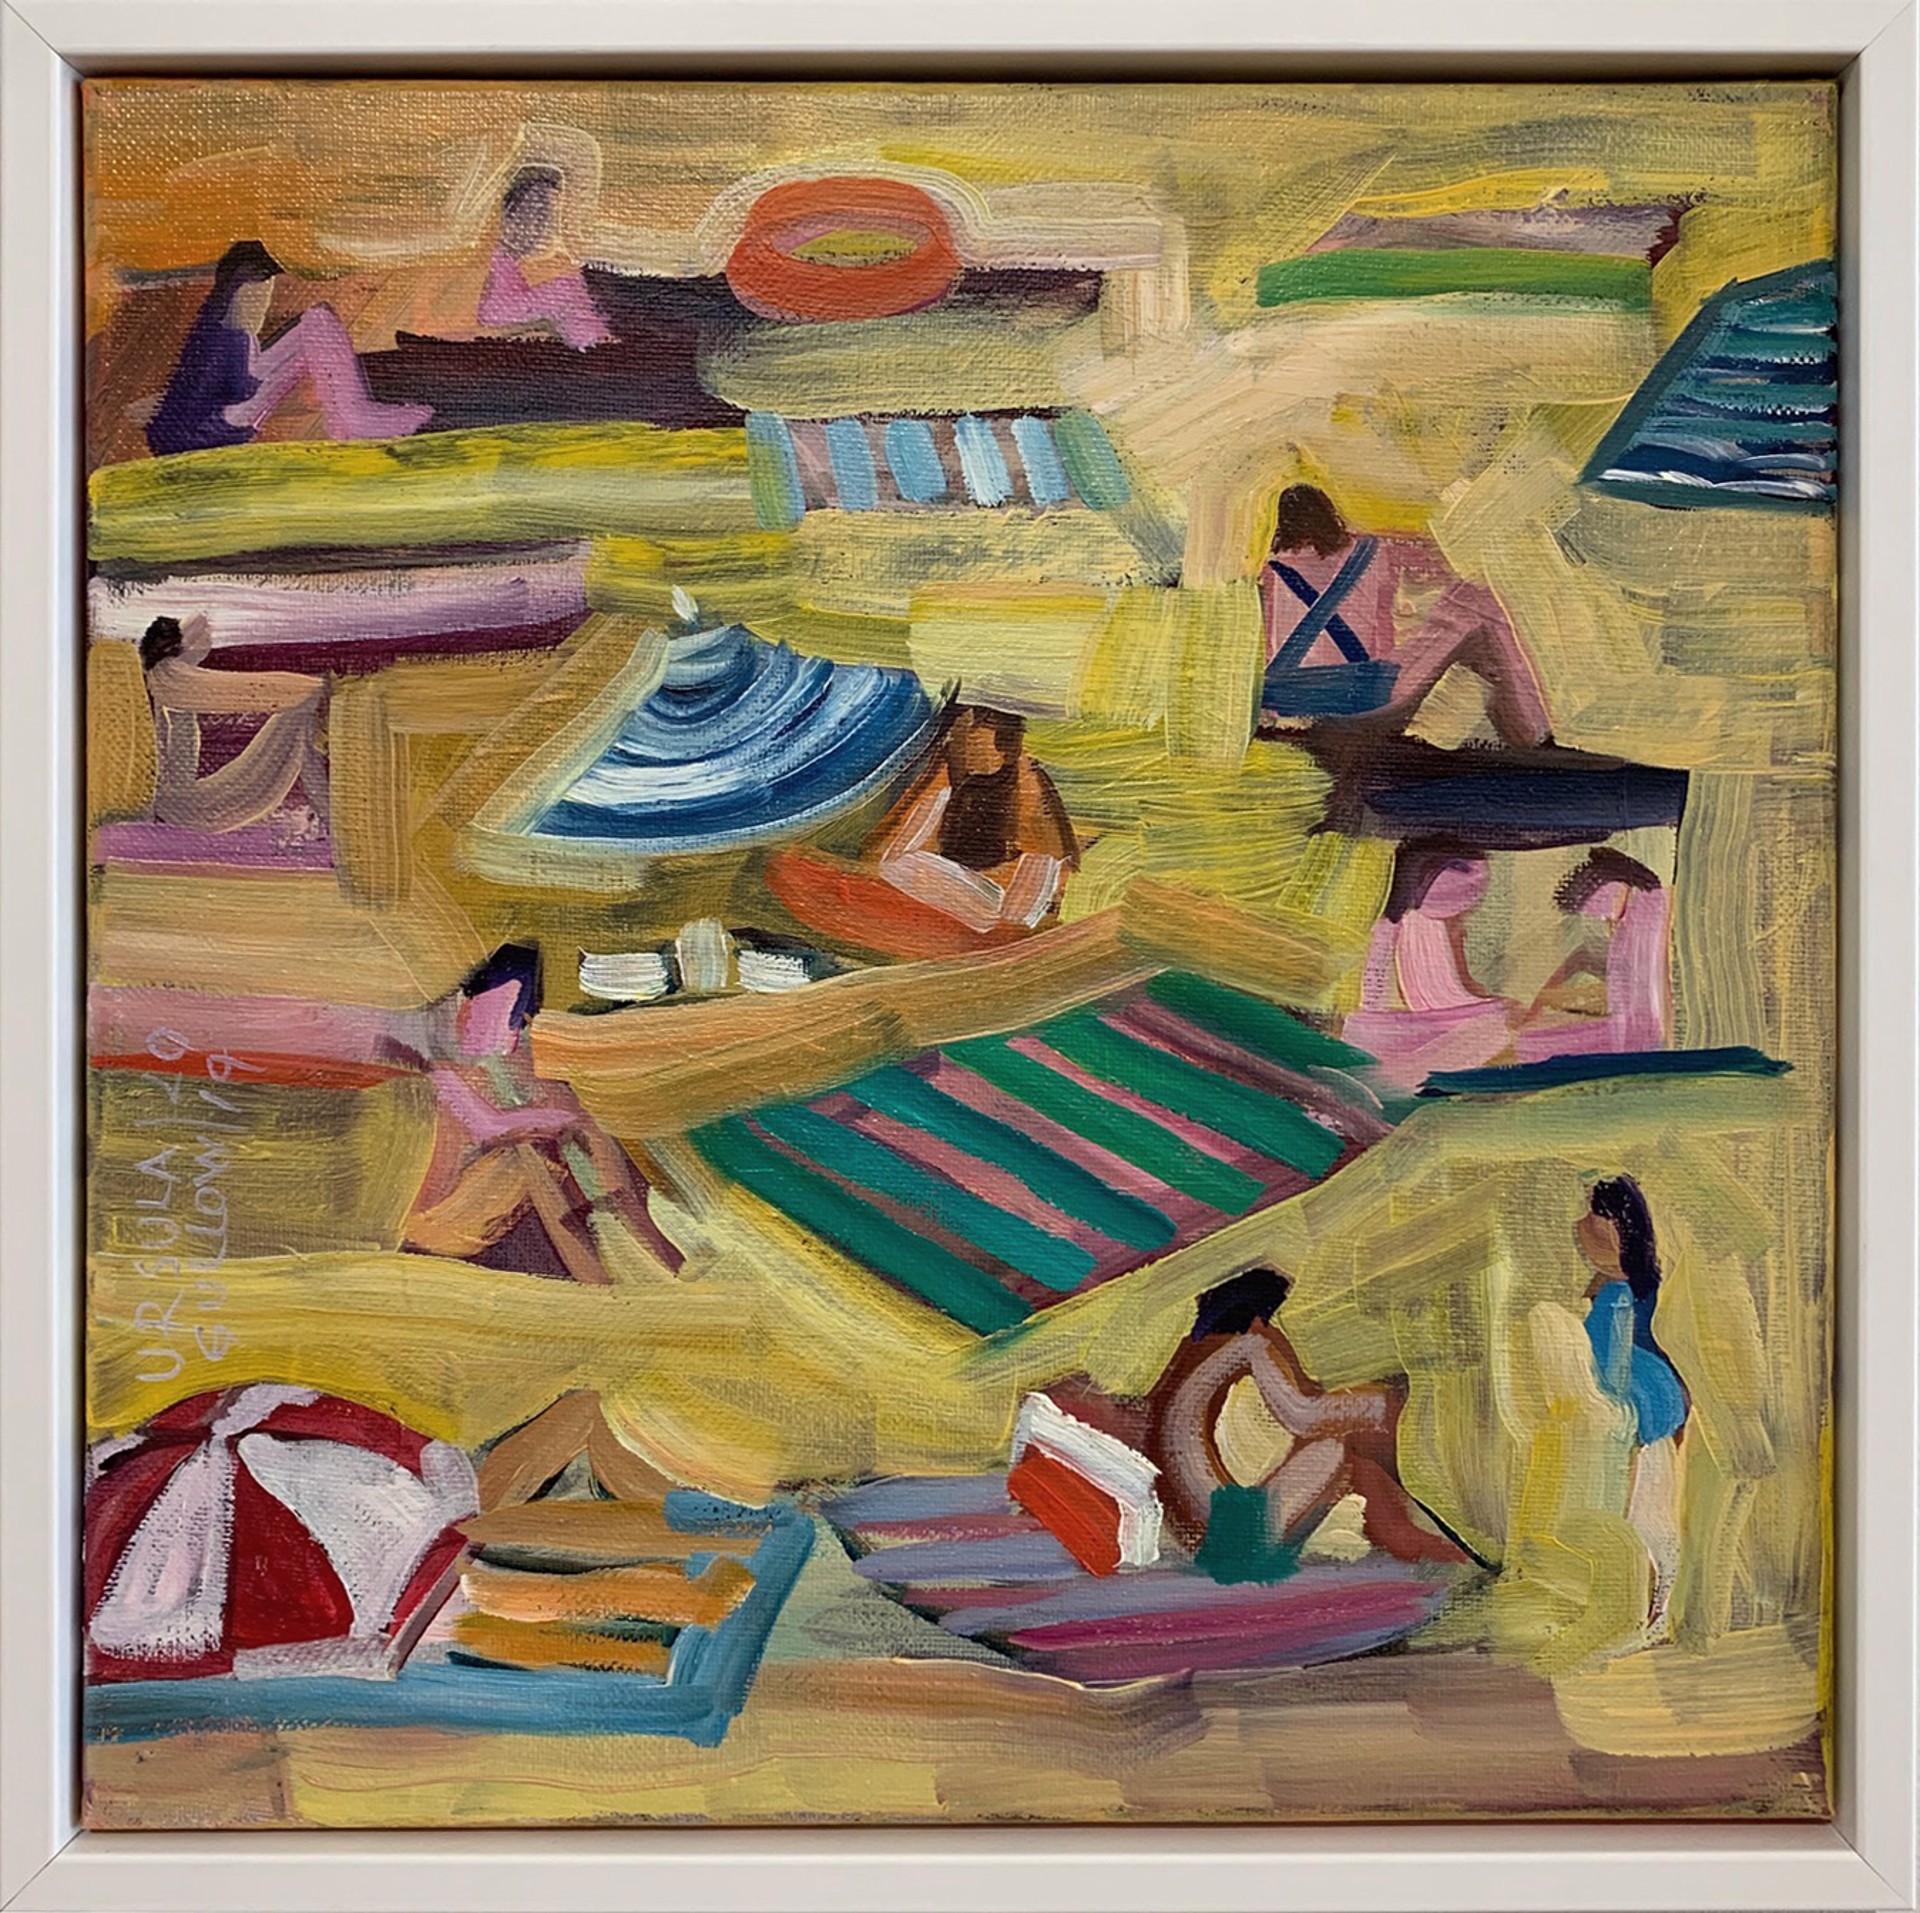 Beach Towels And Umbrellas by Ursula Gullow